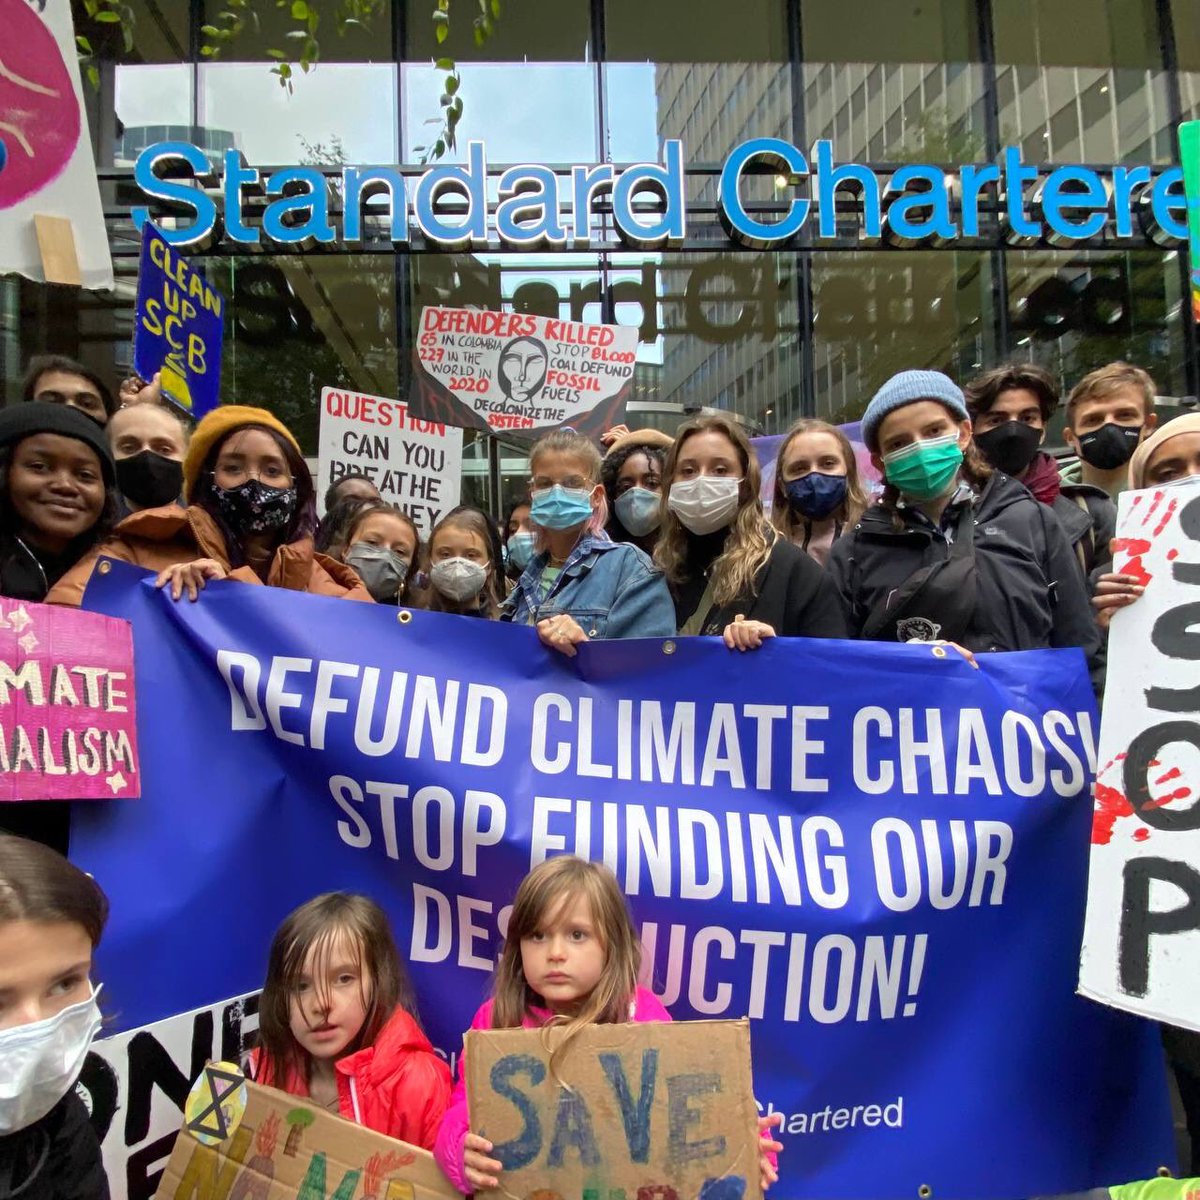 School strike week 167. Today we’re outside @StanChart asking them to stop funding our destruction. Banks still pour fantasy amounts into fossil fuels, destabilising the planet and putting many people’s lives at risk. #FridaysForFuture #CleanUpStandardChartered #UprootTheSystem